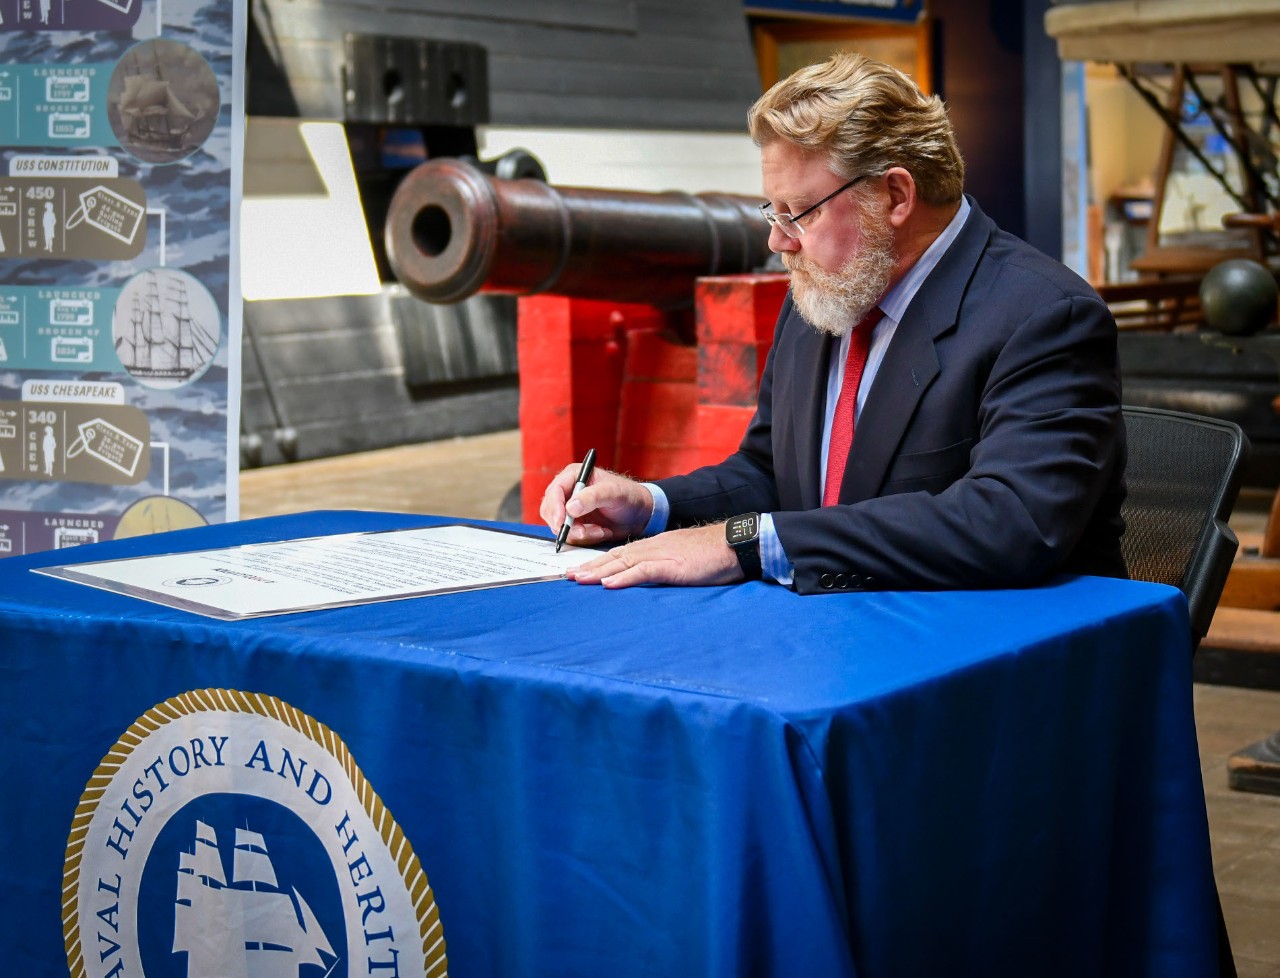 <p>220509-N-OL781-1015 WASHINGTON NAVY YARD (May 9, 2022) Patrick C. Burns, Deputy Director of Naval History and Heritage Command, signs a proclamation at the National Museum of the U.S. Navy, which proclaims May 10, 2022, to be U.S. Navy Original Six Frigates Day. NHHC commemorated the 225th anniversary of the launch of the first of the six frigates (United States), authorized by the 1794 legislation entitled “Act to Provide a Naval Armament.” The authorization promised the president the new Navy’s first ships of war: United States (launched 1797), Constellation (1797), Constitution (1797), Congress (1799), Chesapeake (1799), and President (1800). (U.S. Navy photo by Mass Communication Specialist 2nd Class Ellen E. Sharkey)</p>
